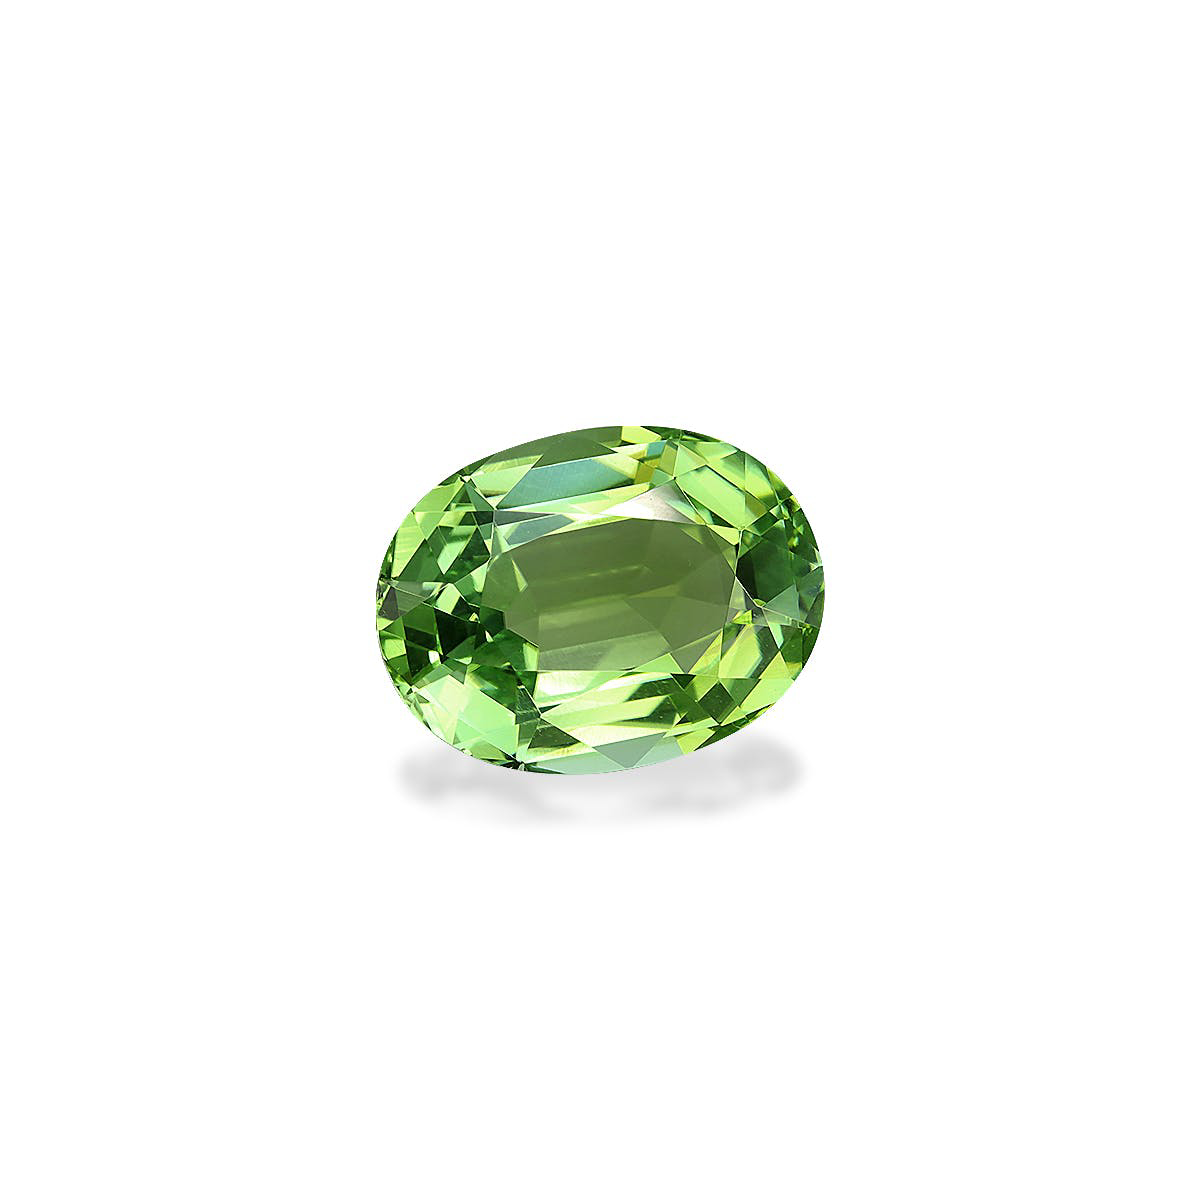 Picture of Green Tourmaline 7.46ct (TG1623)